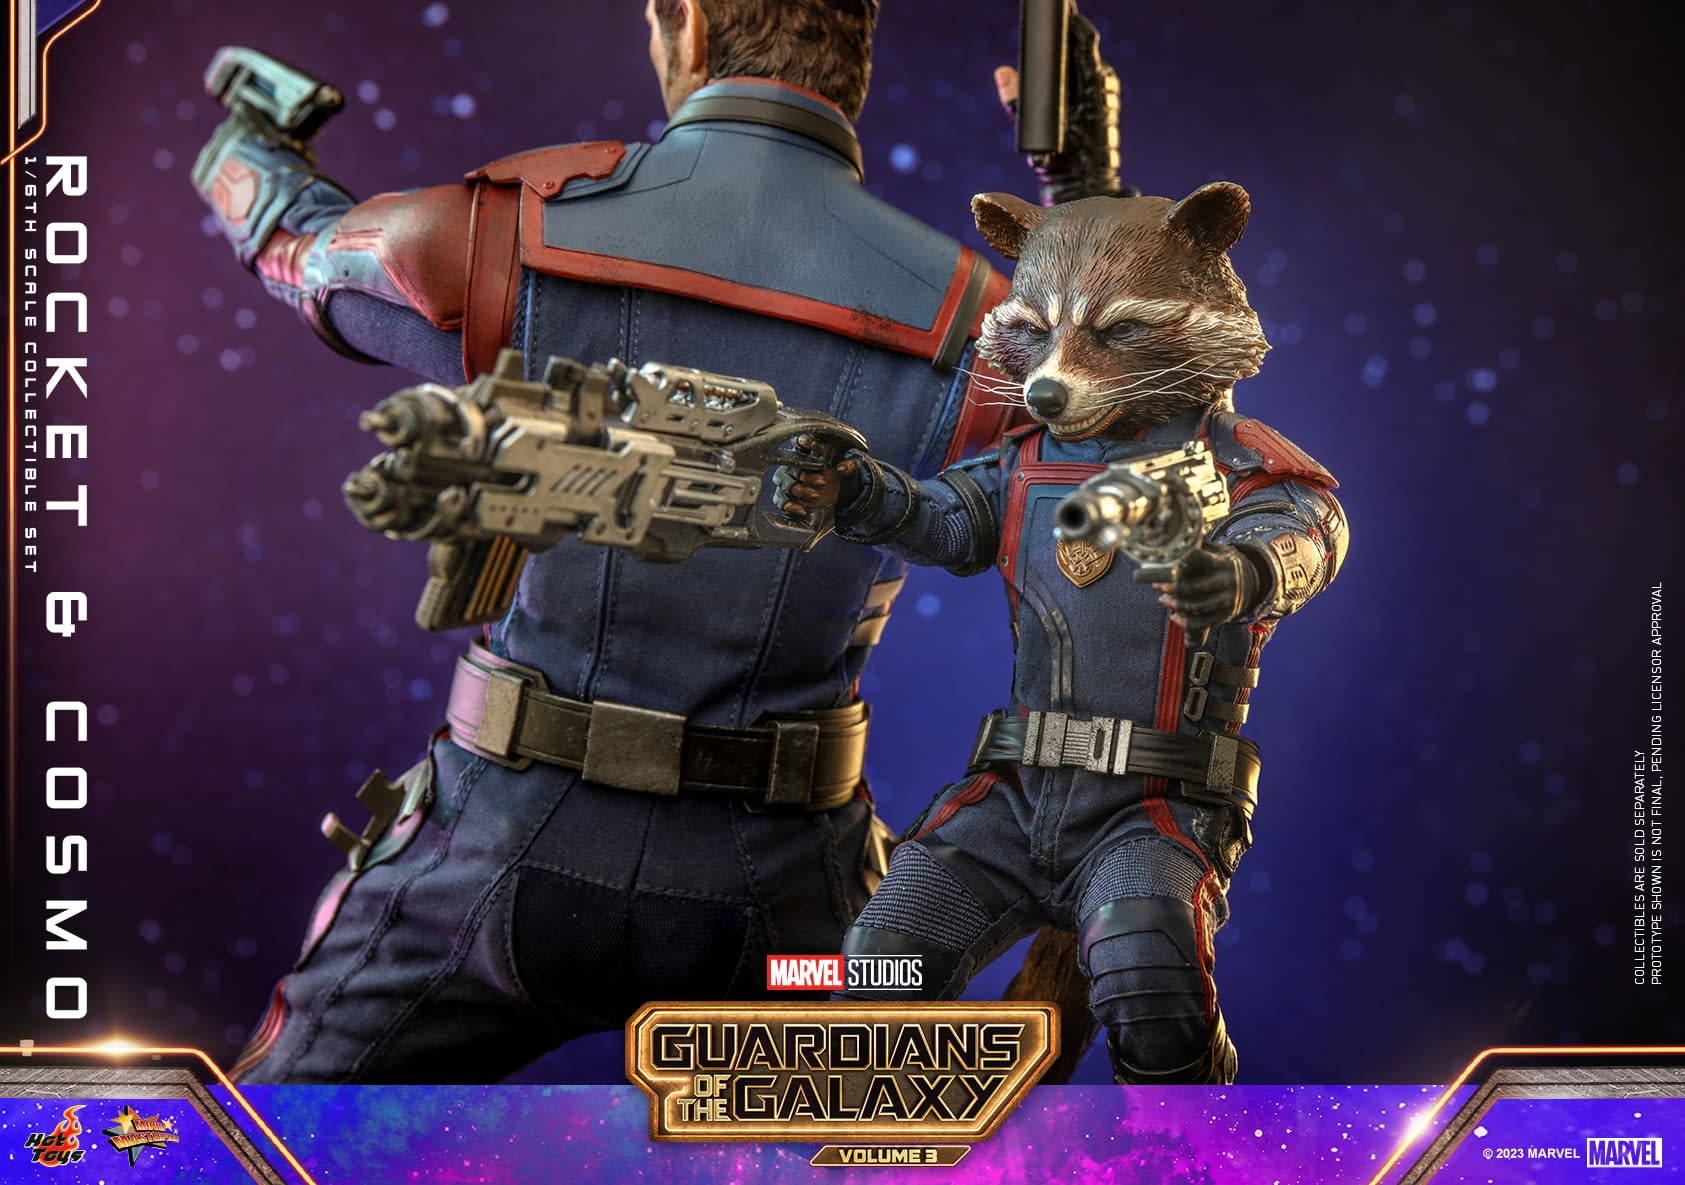 Guardians of the Galaxy Vol. 3 Rocket and Cosmo Set Debuts at Hot Toys